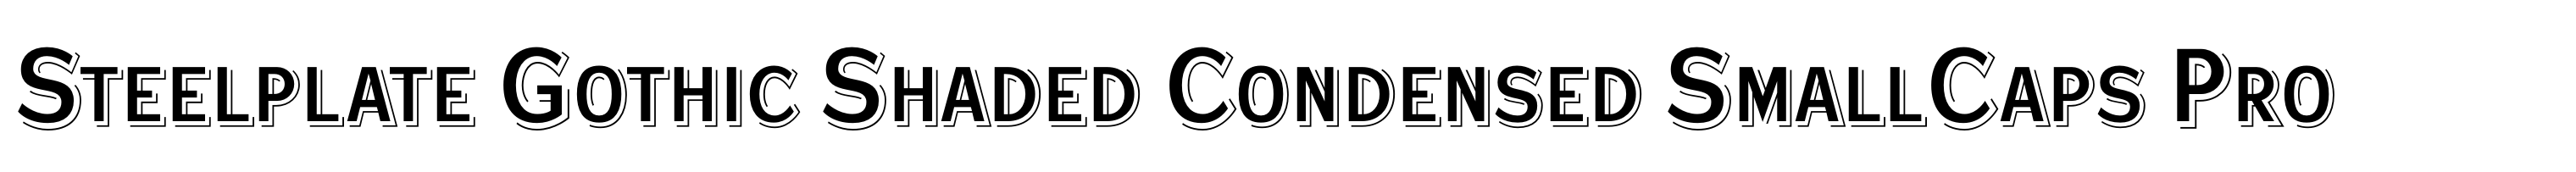 Steelplate Gothic Shaded Condensed SmallCaps Pro